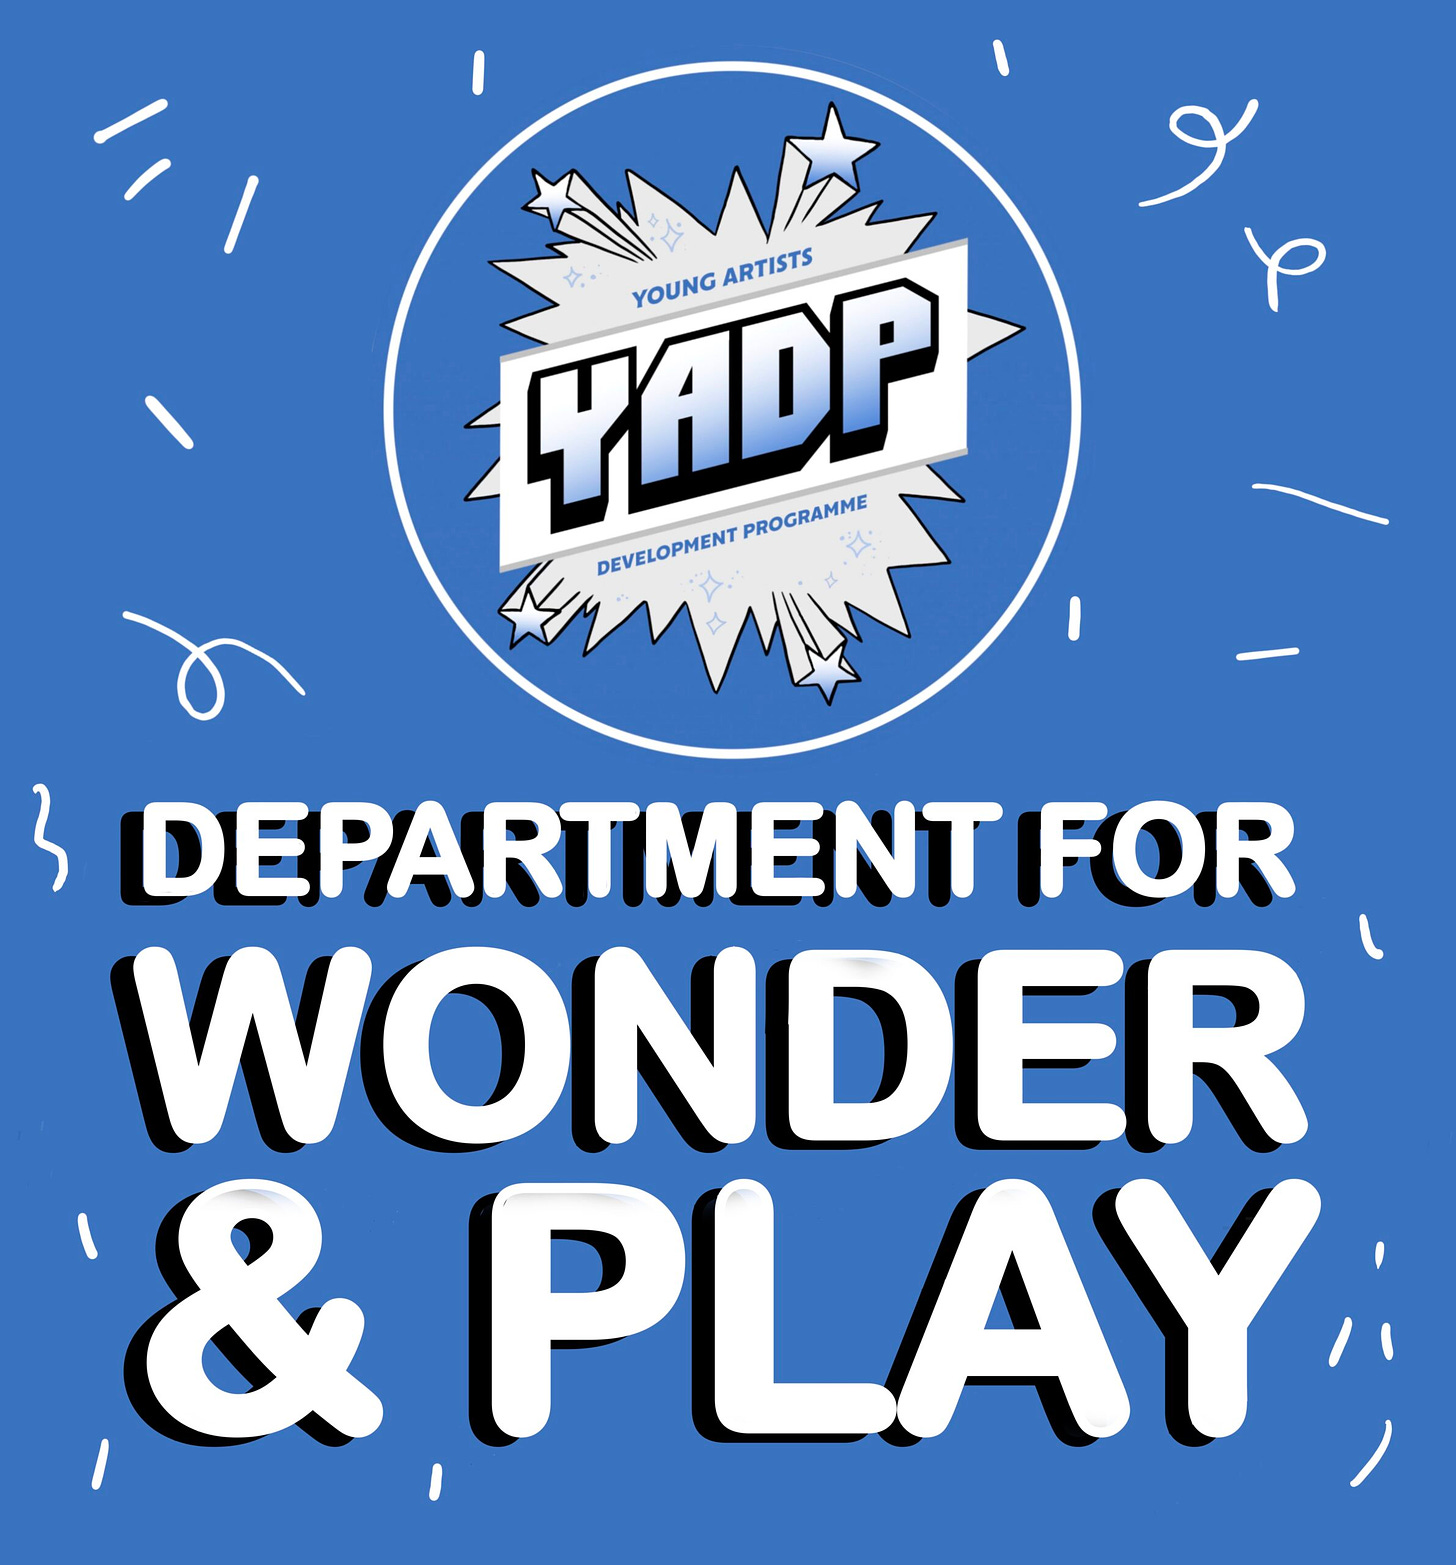 A digital image combining drawings and text on a dusky blue background. At the top of the image is the logo for Touretteshero’s Young Artist Development Programme the initials YADP are at the centre of the logo with stars bursting from the centre. Under this bold white text with a black shadow reads Department of Wonder and Play - this the theme for this years YADP a programme for disabled, neurodivergent and chronically ill young people.